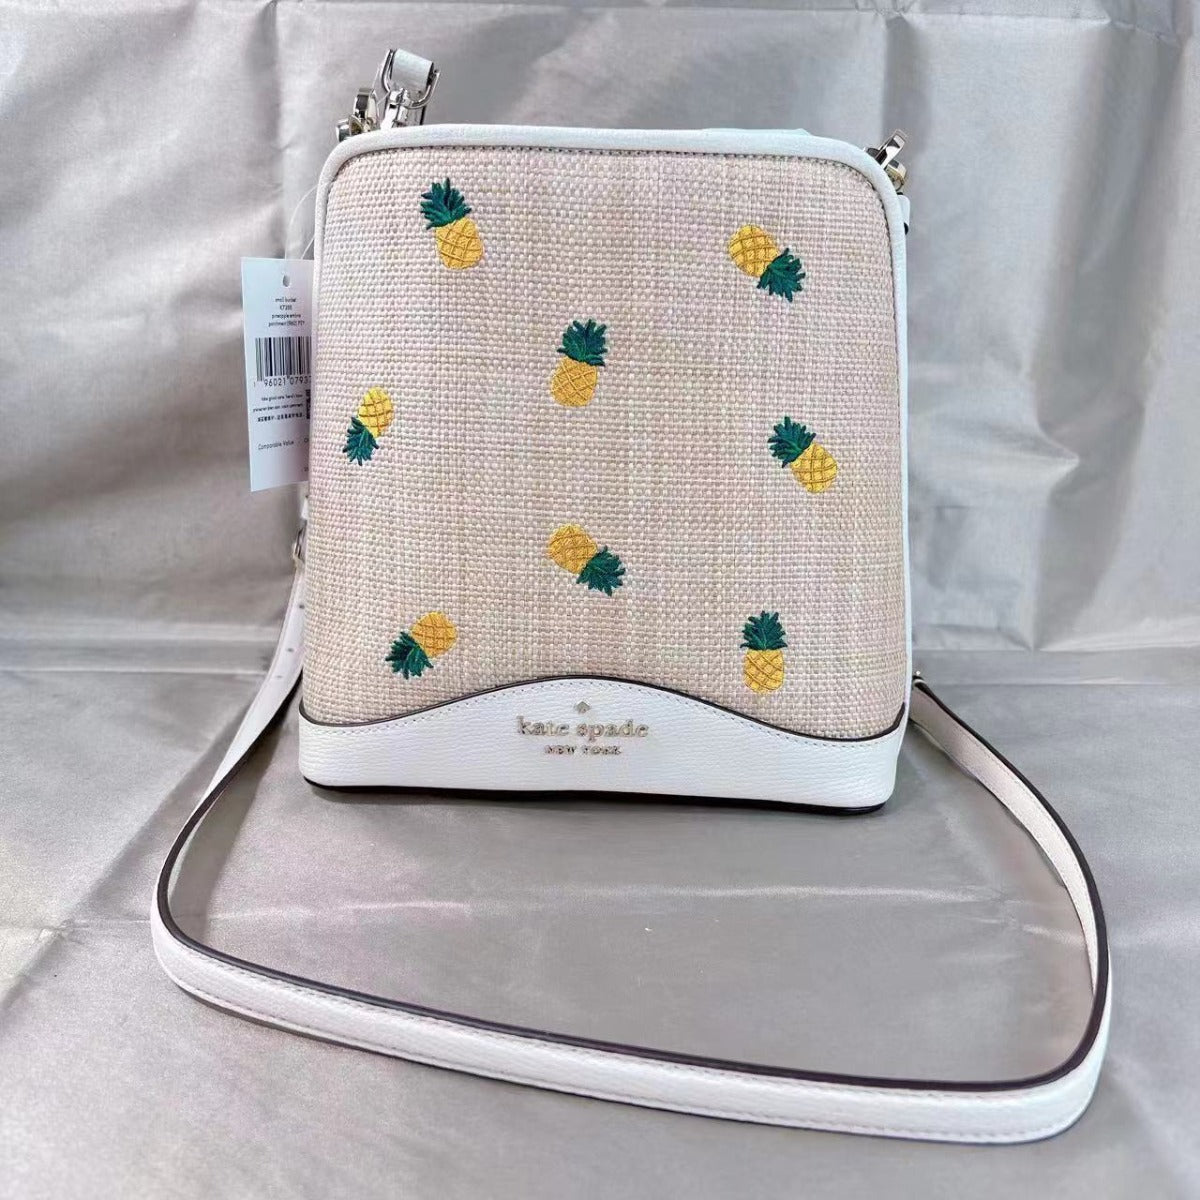 Kate Spade k7288 darcy small pineapple bucket bag in parchment multi 196021079375